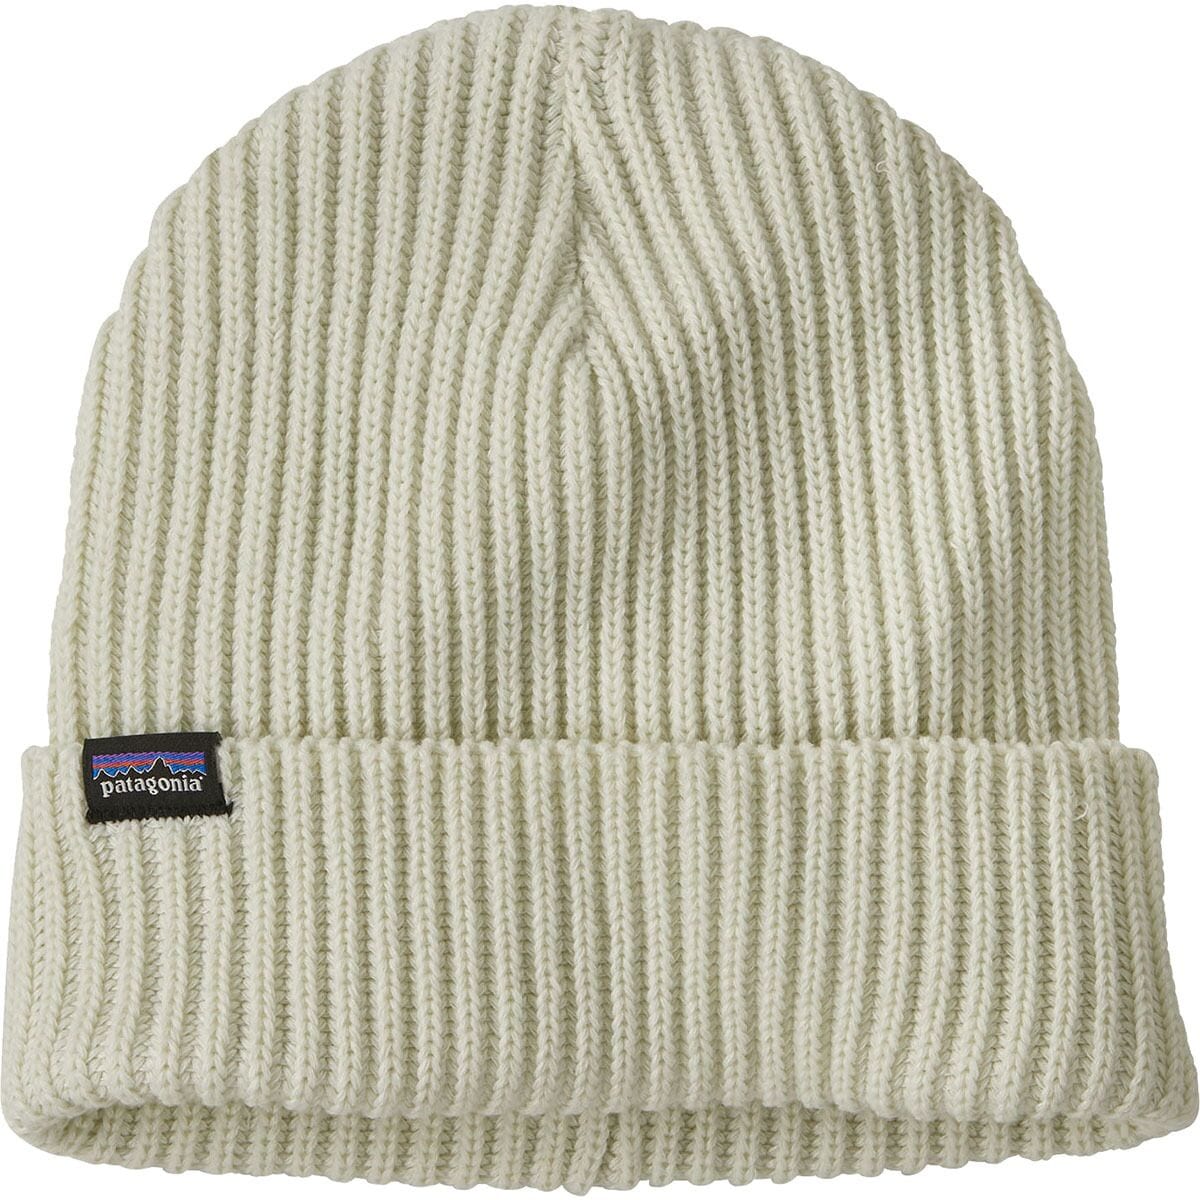 Patagonia Fishermans Rolled Beanie | Backcountry